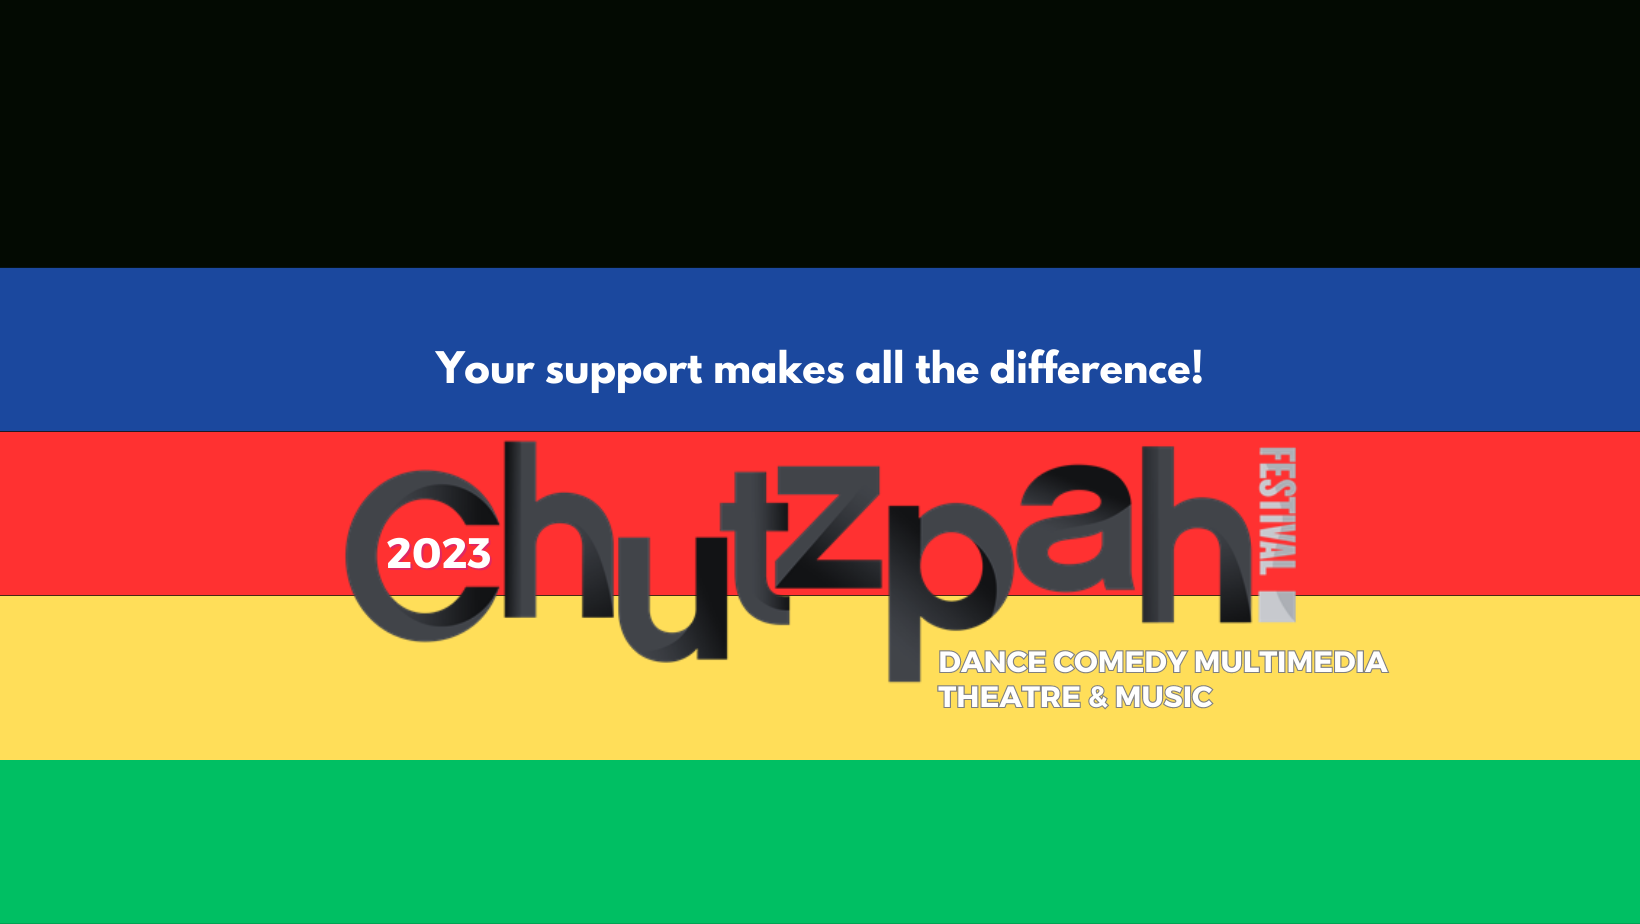 The 2022 Chutzpah! Festival offers comedy, musicality, and